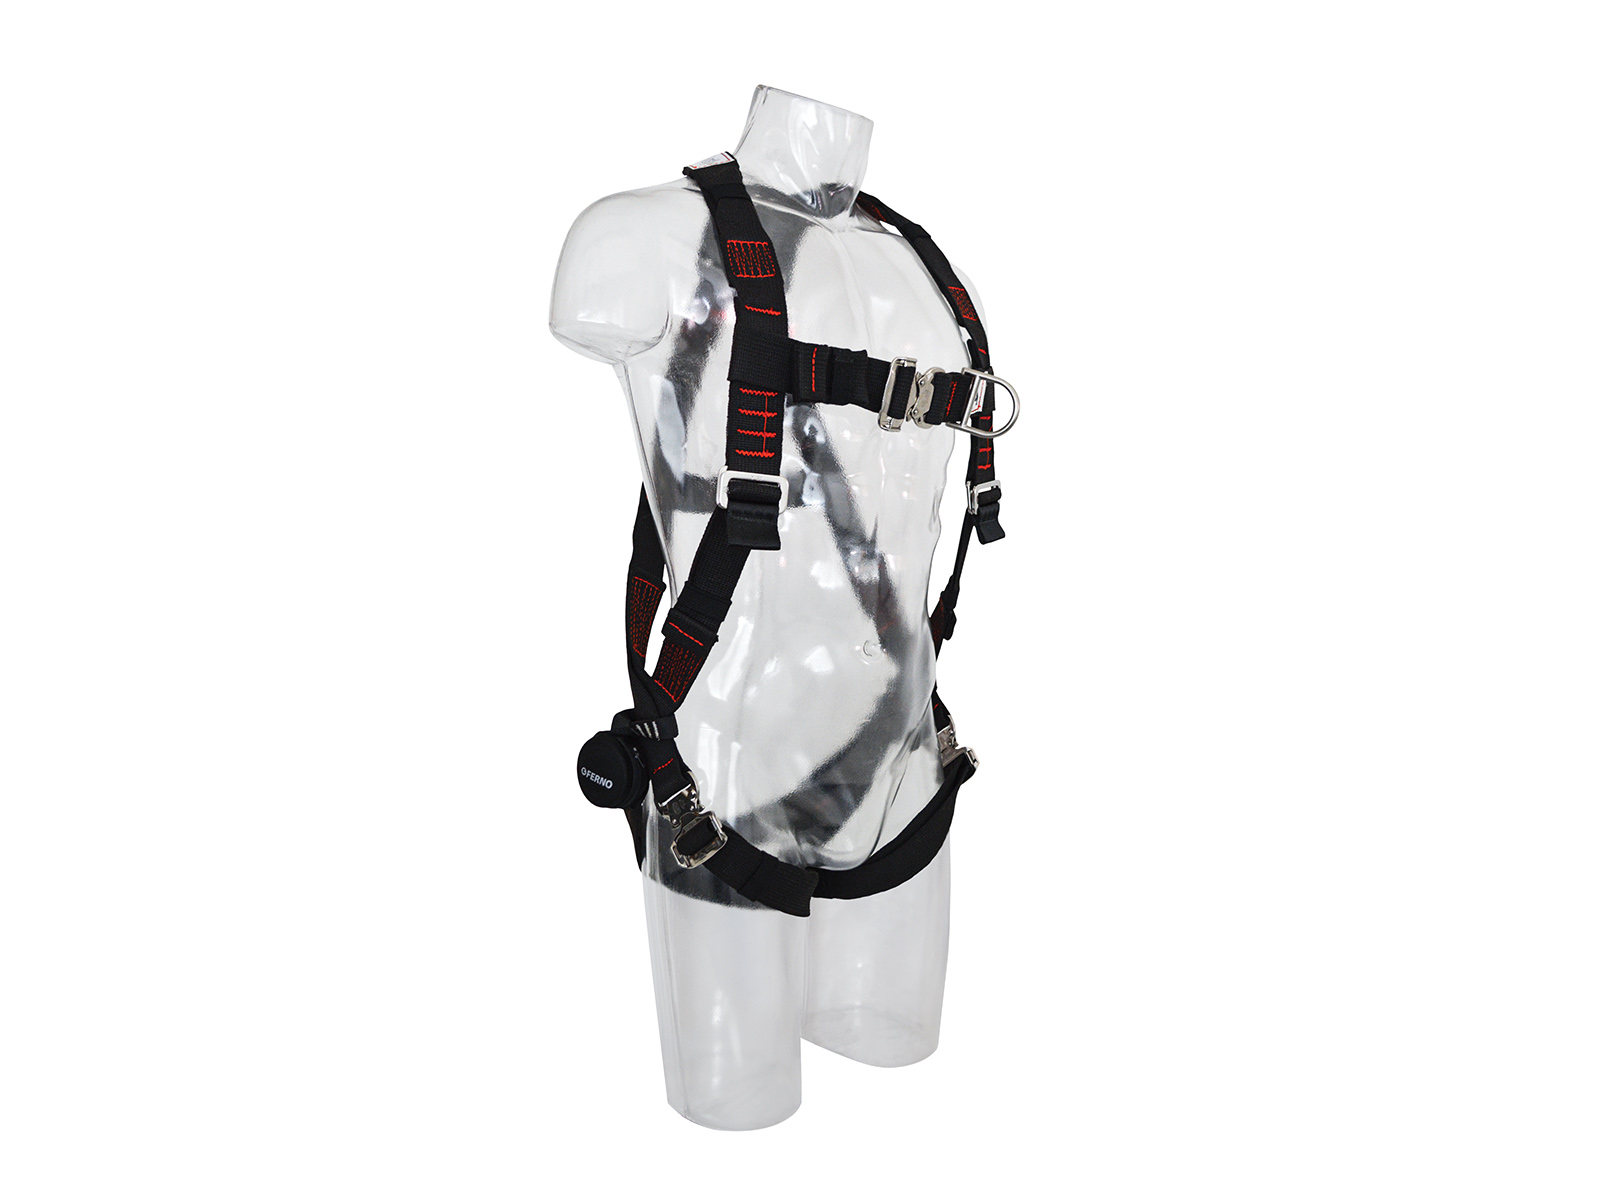 Ferno Hot Works Harness